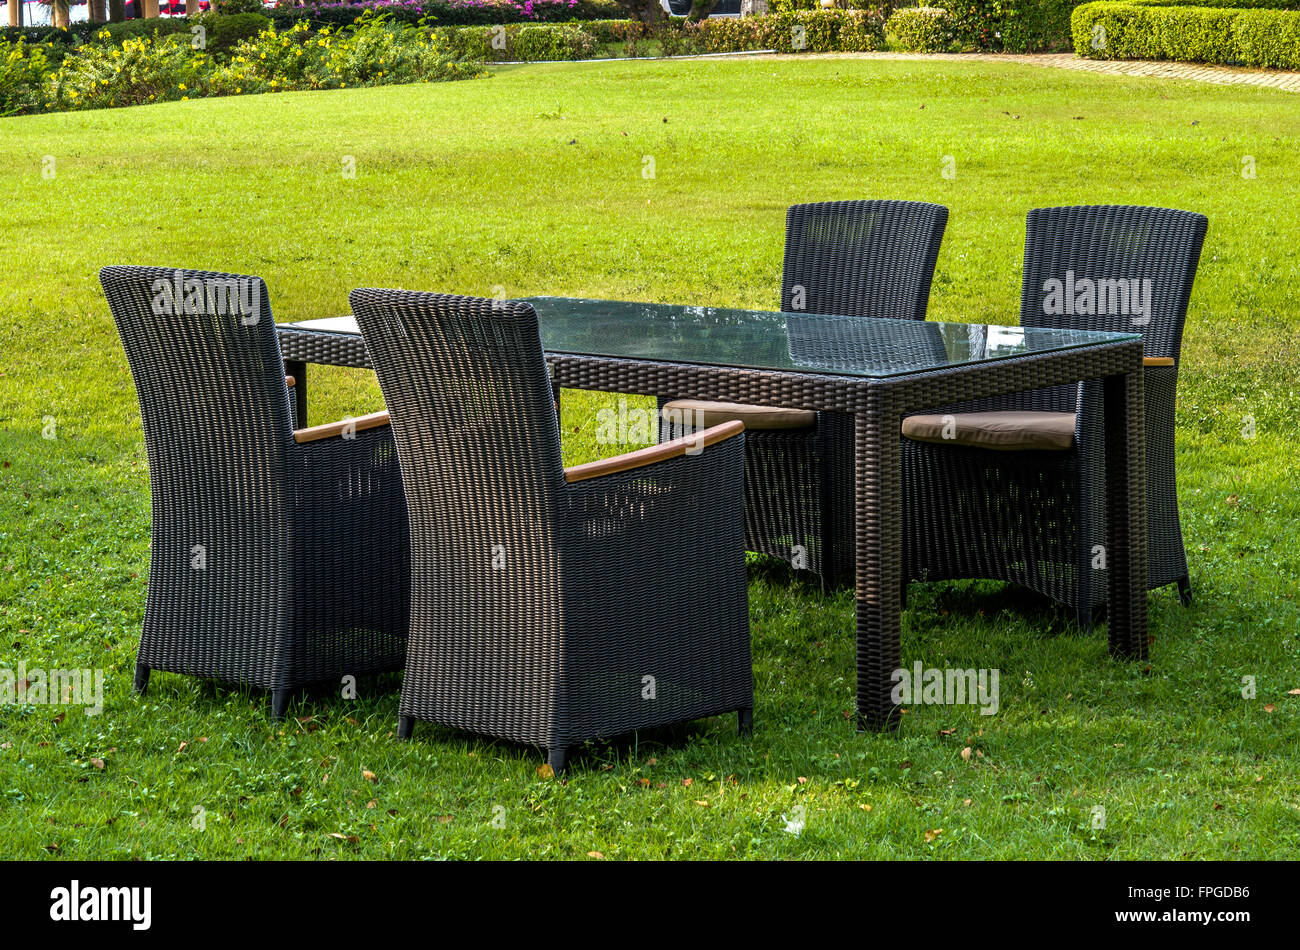 Rattan furniture, table, chairs and cushion outdoors in the garden Stock Photo